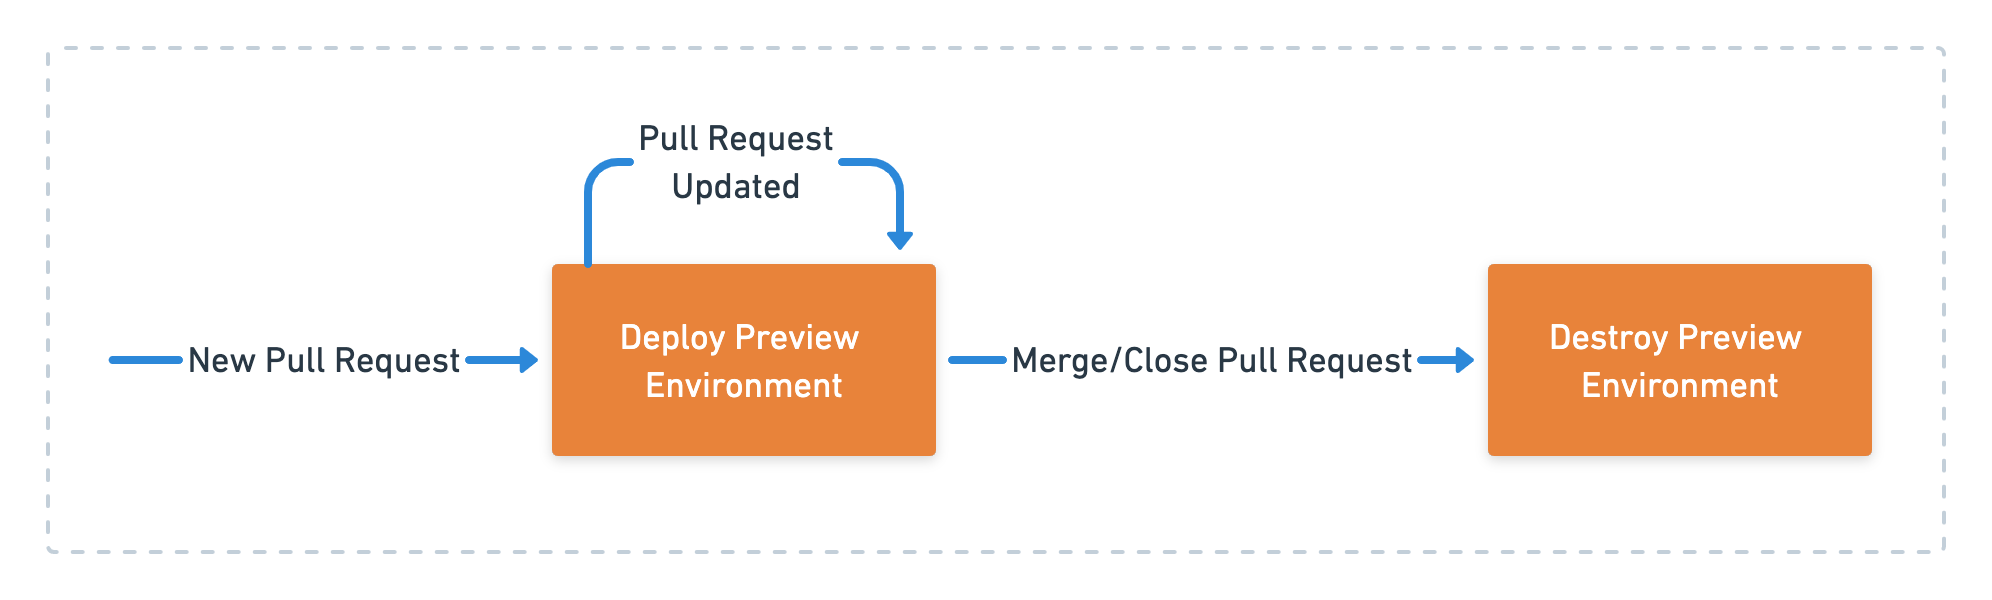 Preview environments lifecycle